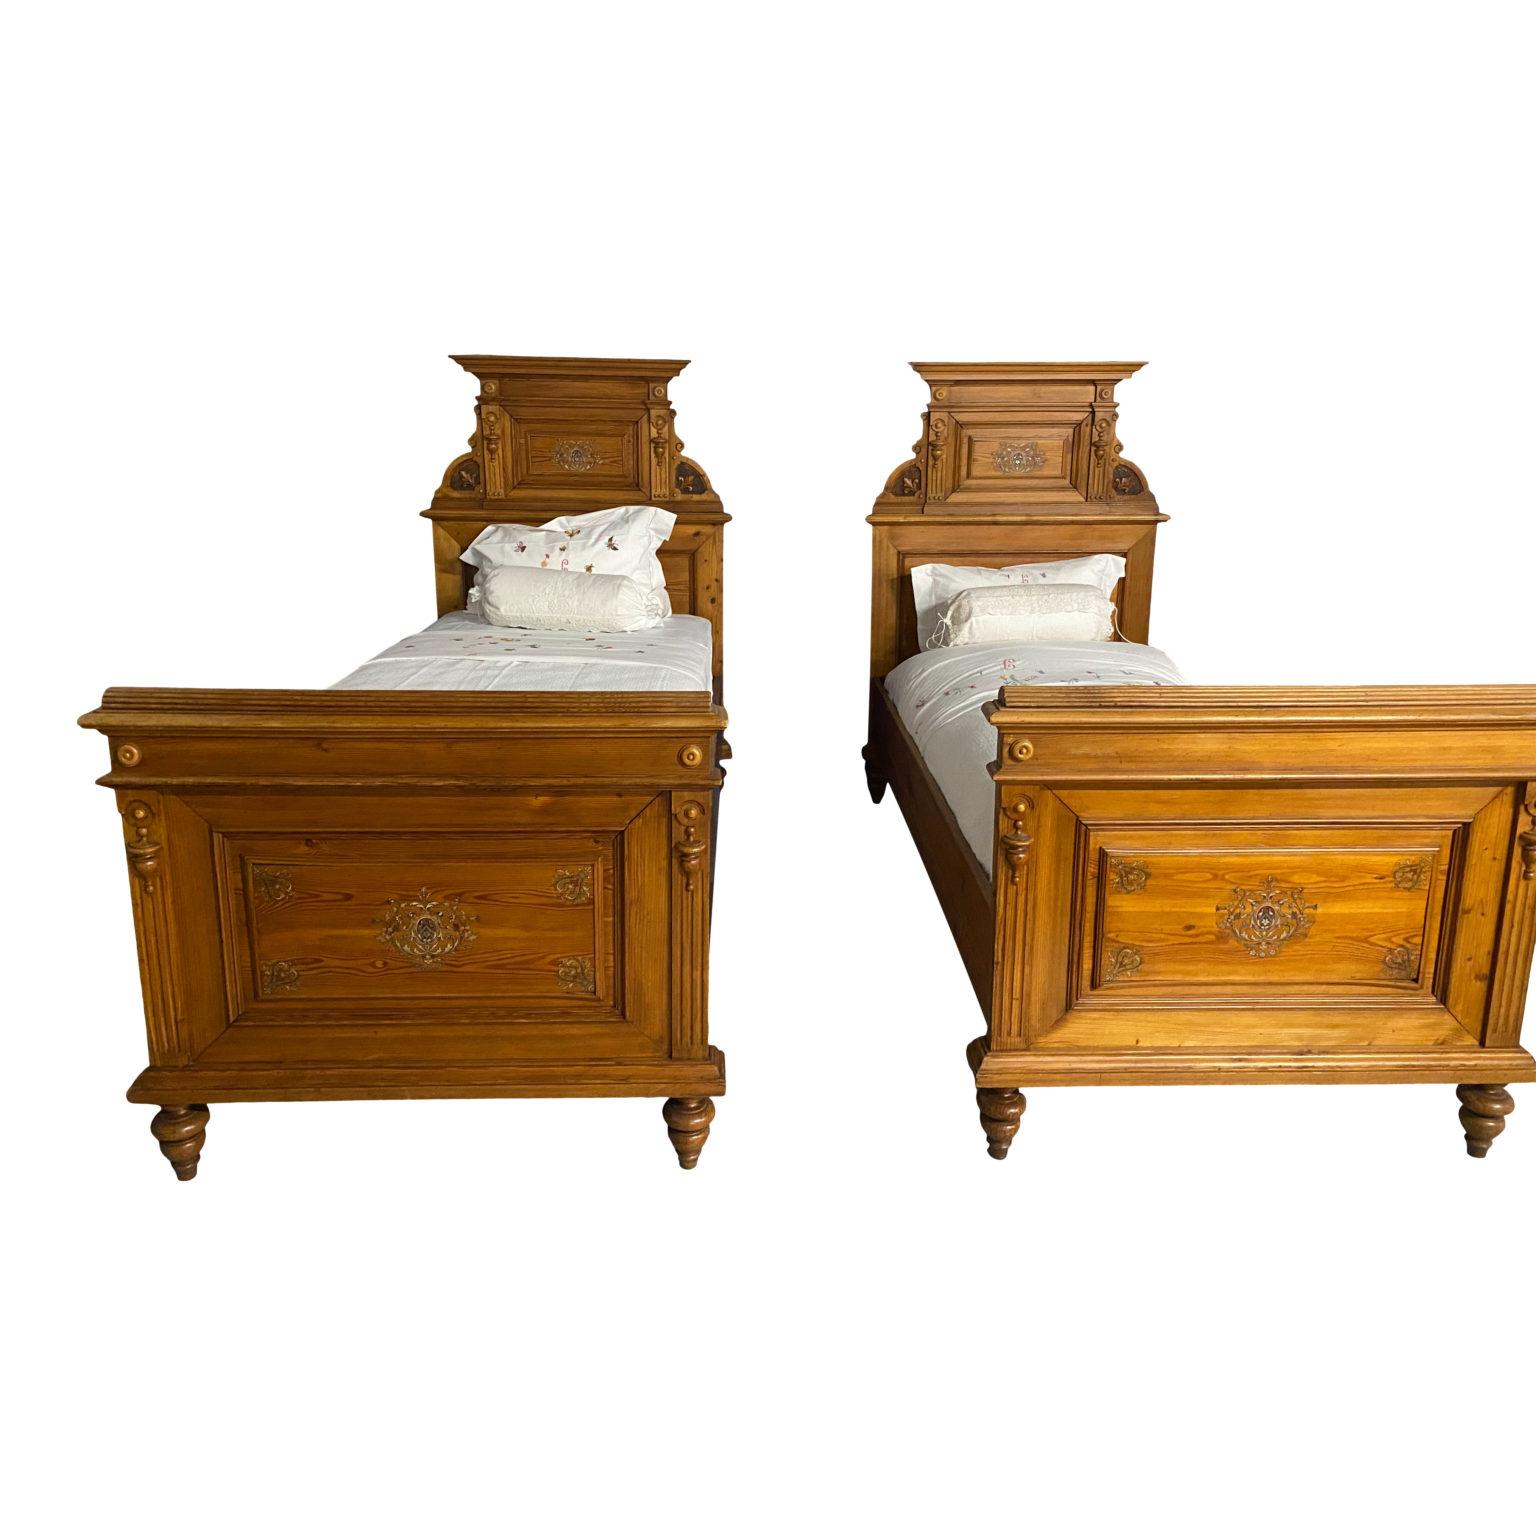 Pair of 19th Century Austrian Pine Beds with Brass, Inlay In Good Condition For Sale In Sag Harbor, NY